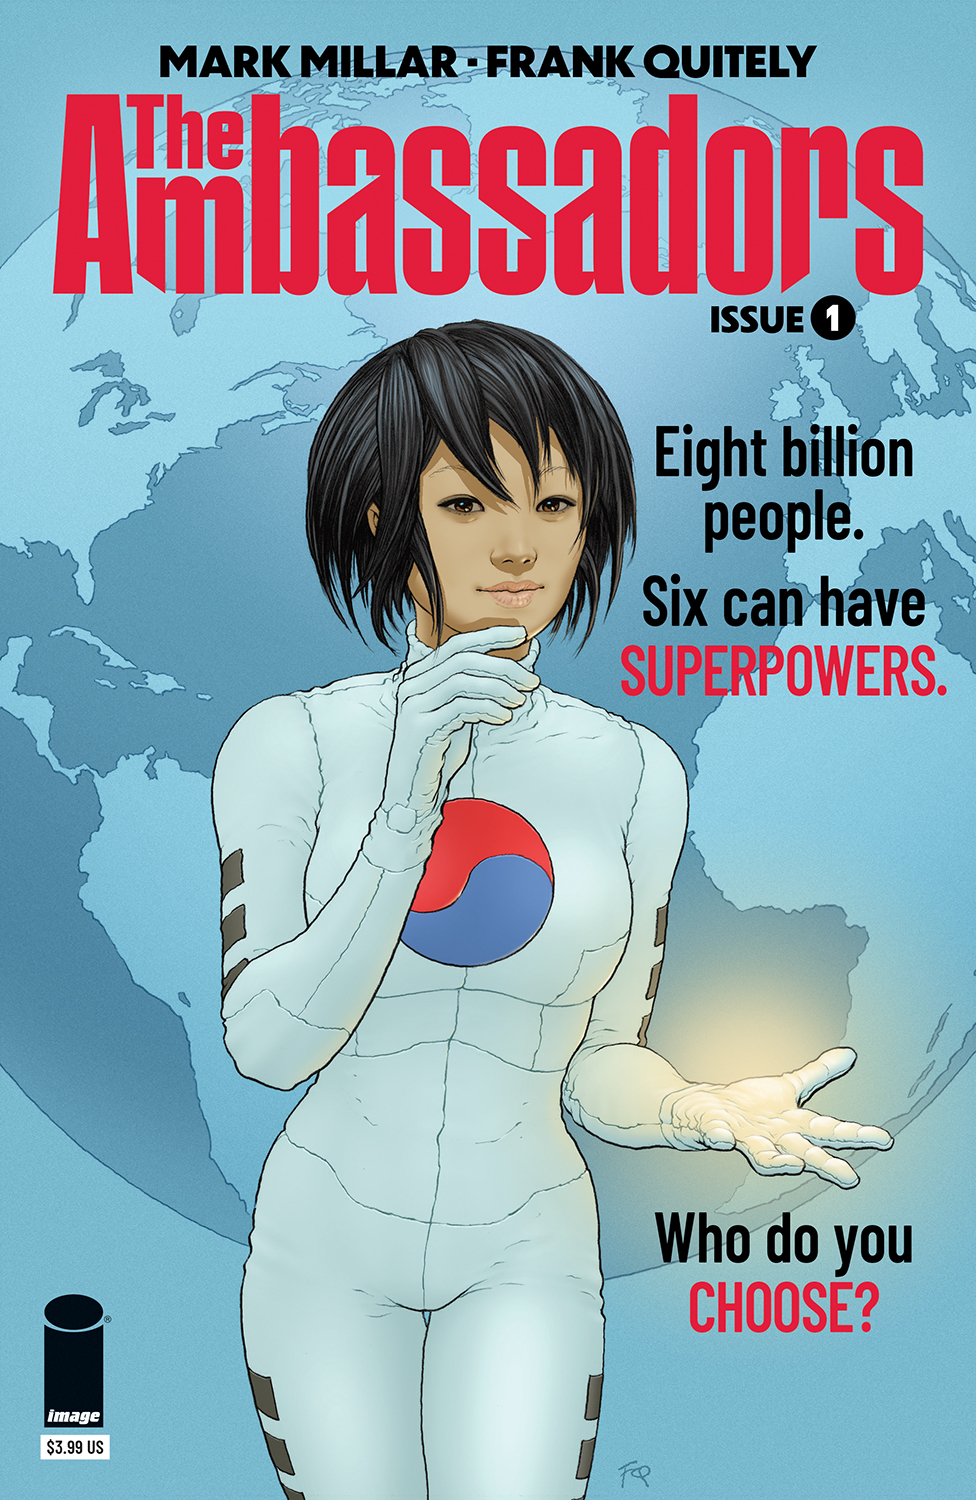 Ambassadors #1 Cover A Quitely (Mature) (Of 6)